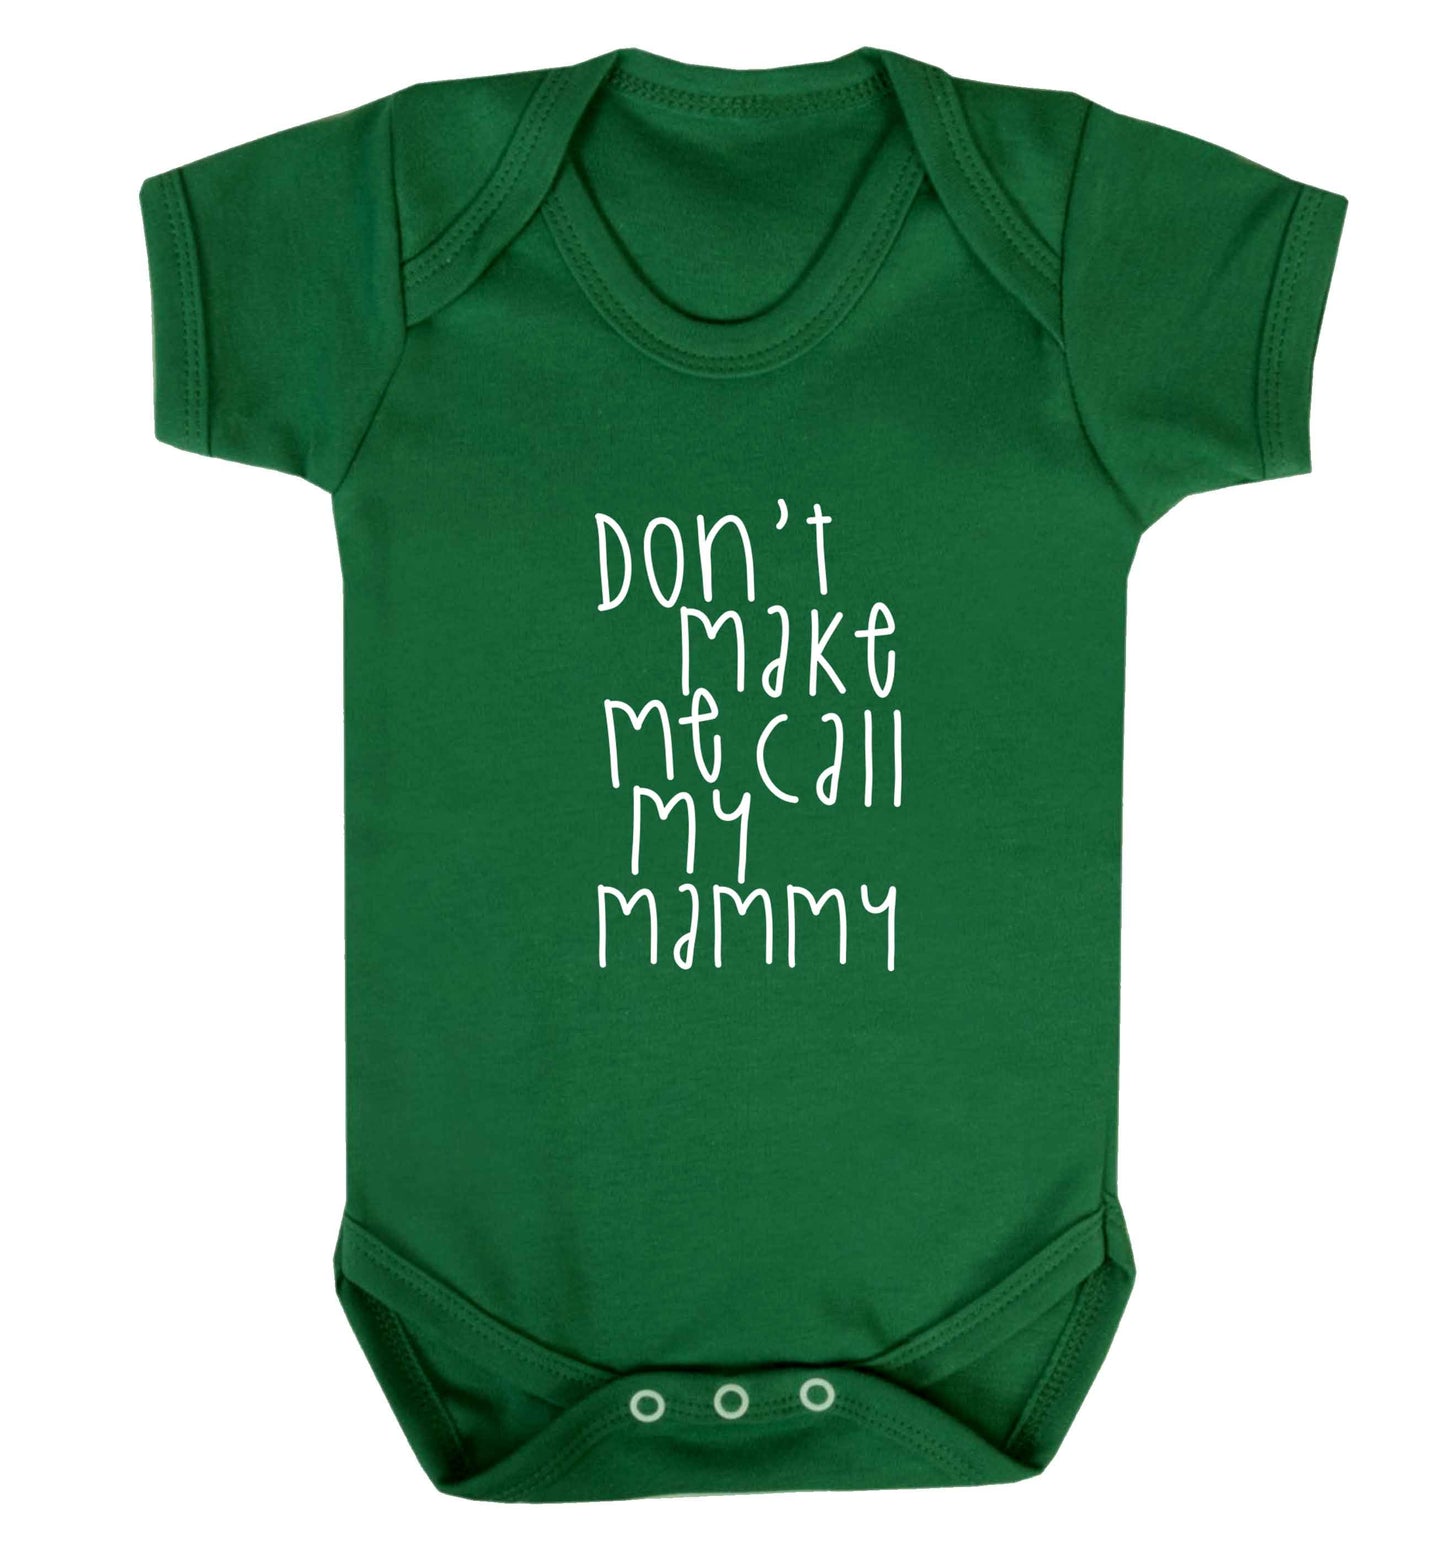 Don't make me call my mammy baby vest green 18-24 months